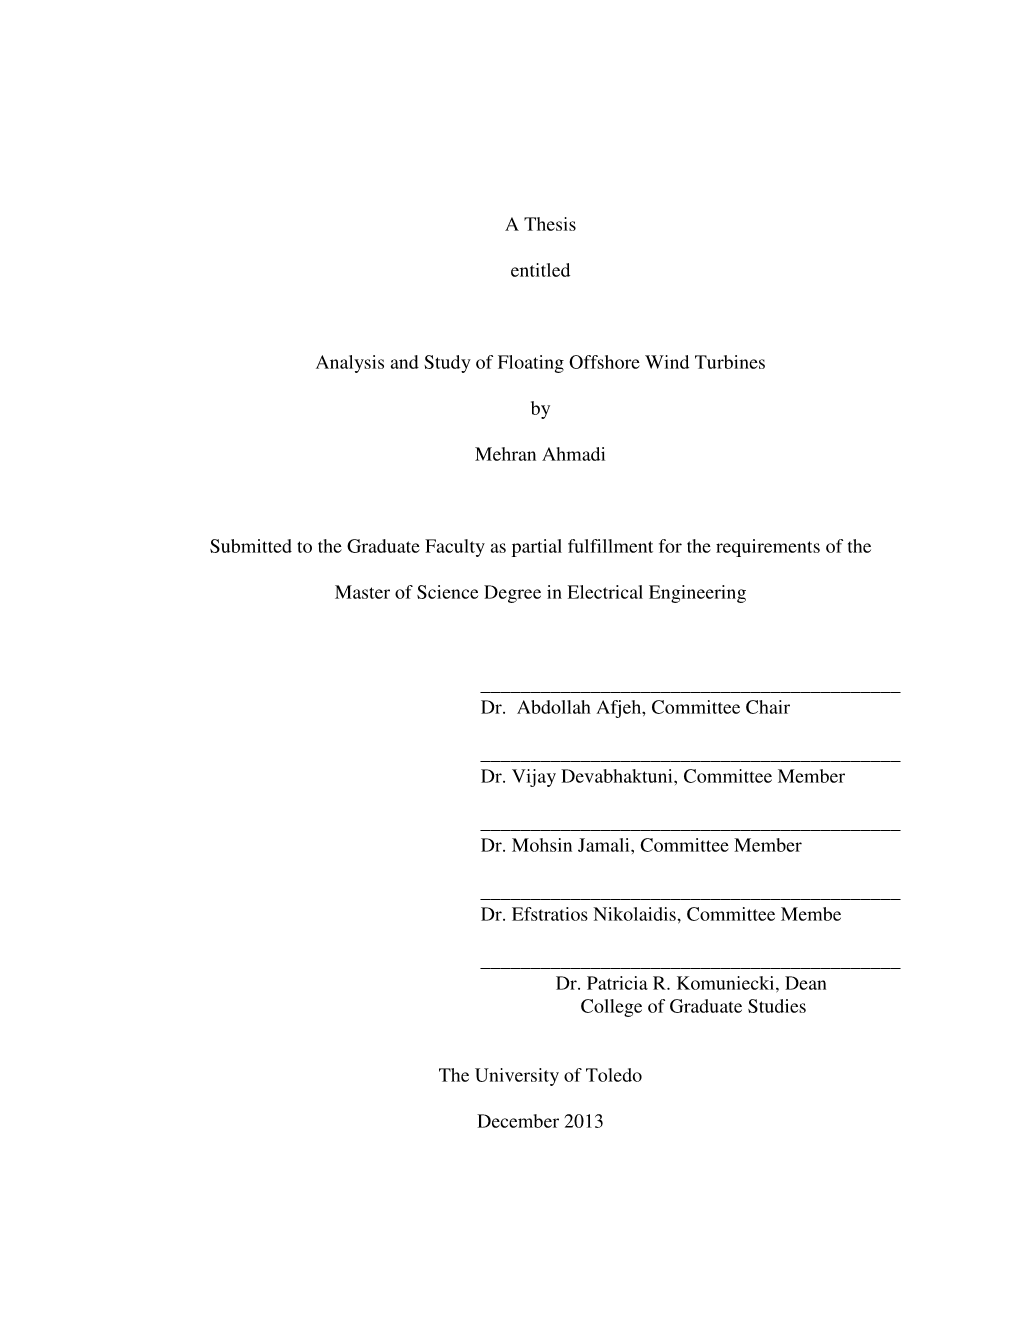 A Thesis Entitled Analysis and Study of Floating Offshore Wind Turbines